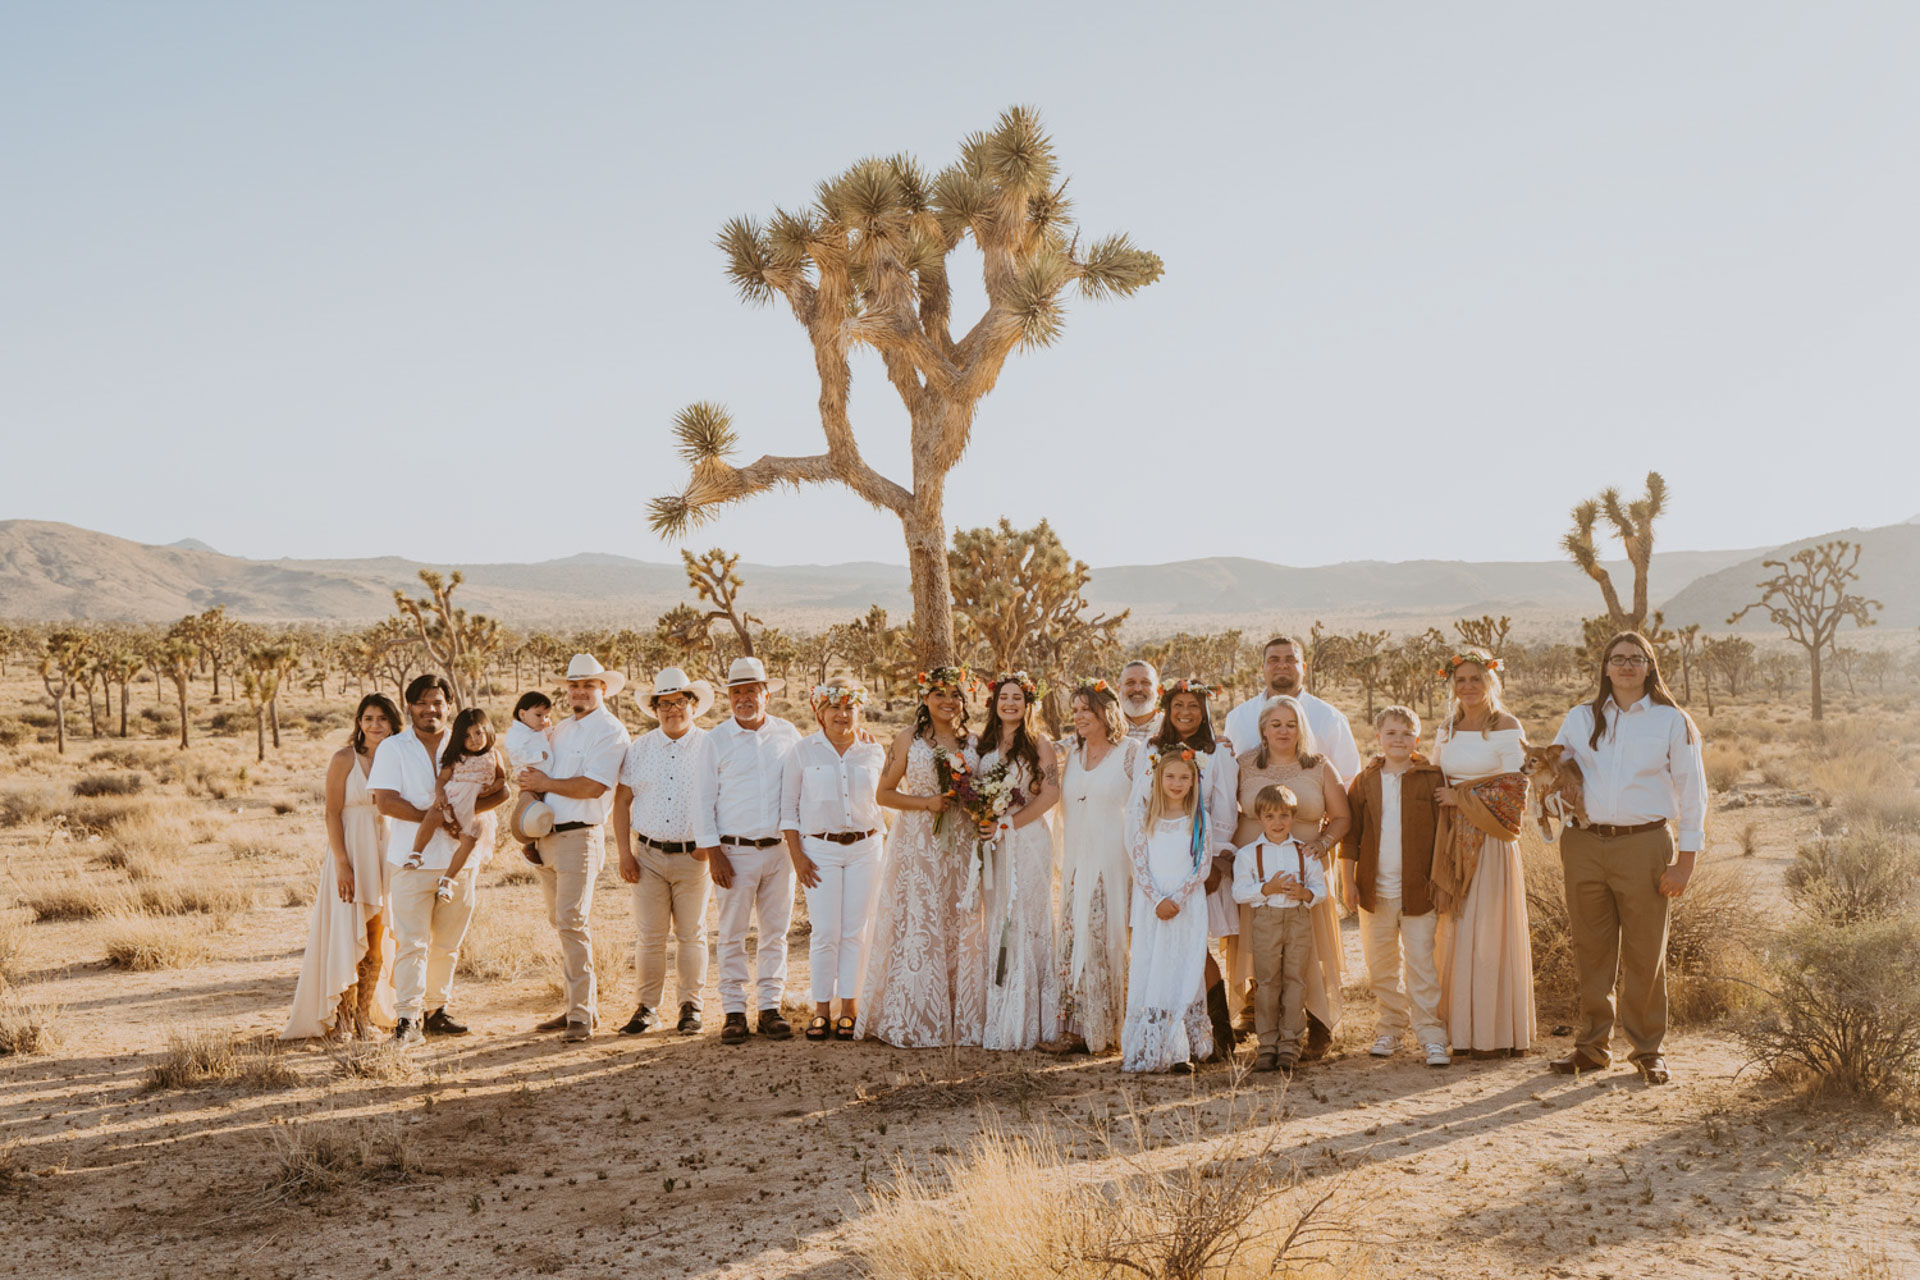 Family of the newlyweds smiling in all white — Joshua Tree Wedding Photographer